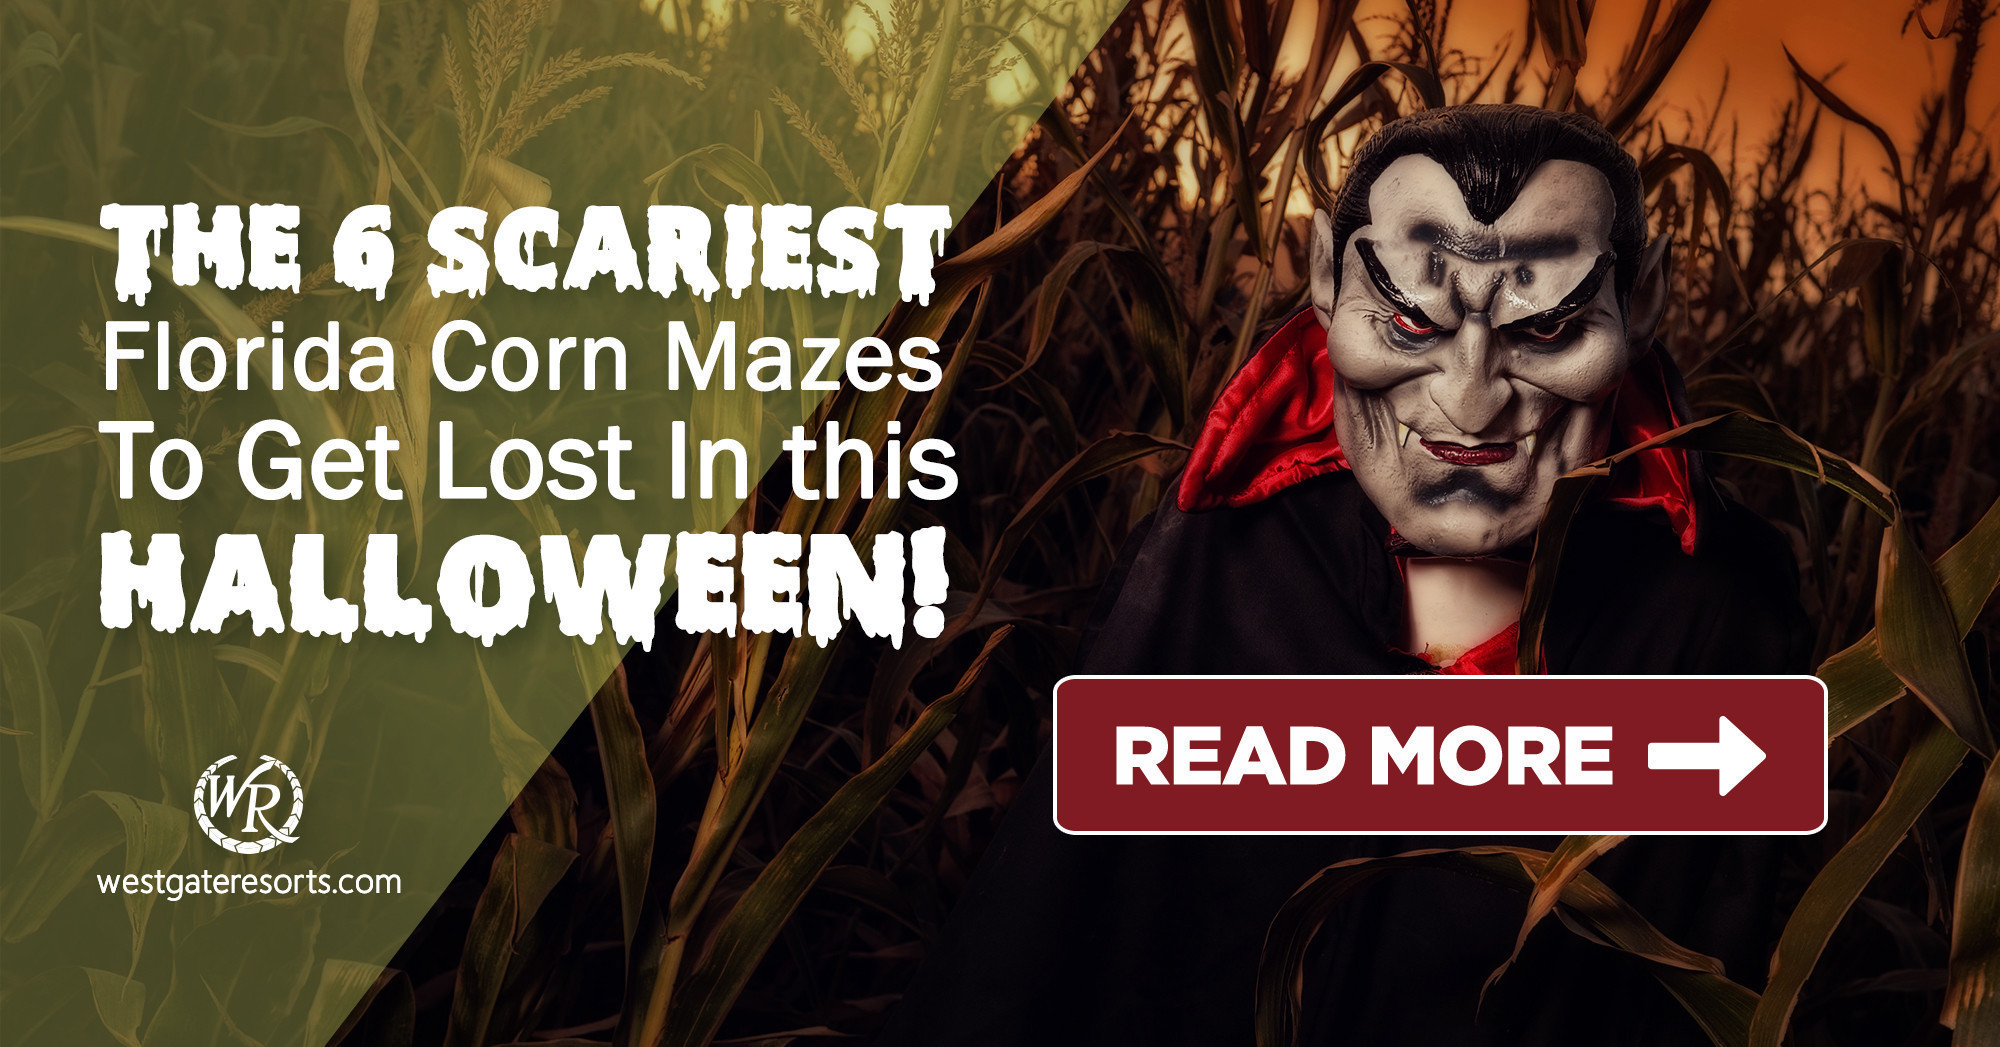 The 6 Scariest Florida Corn Mazes To Get Lost In This Halloween! | Westgate Resorts